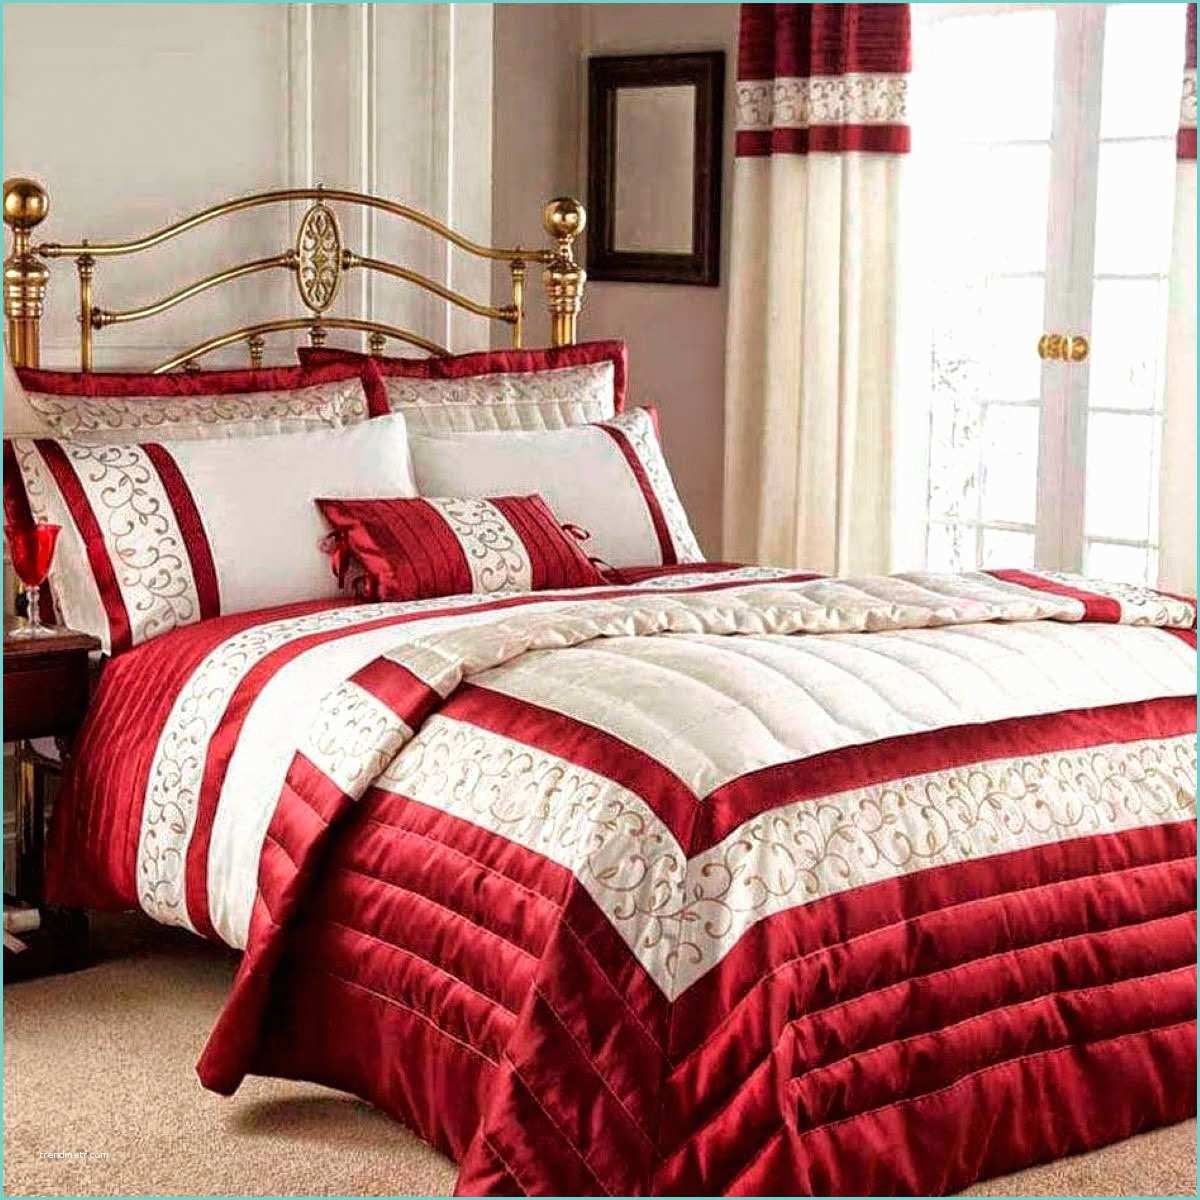 Chambre A Coucher Rouge Awesome Chambre A Coucher Rouge Et Beige S Design